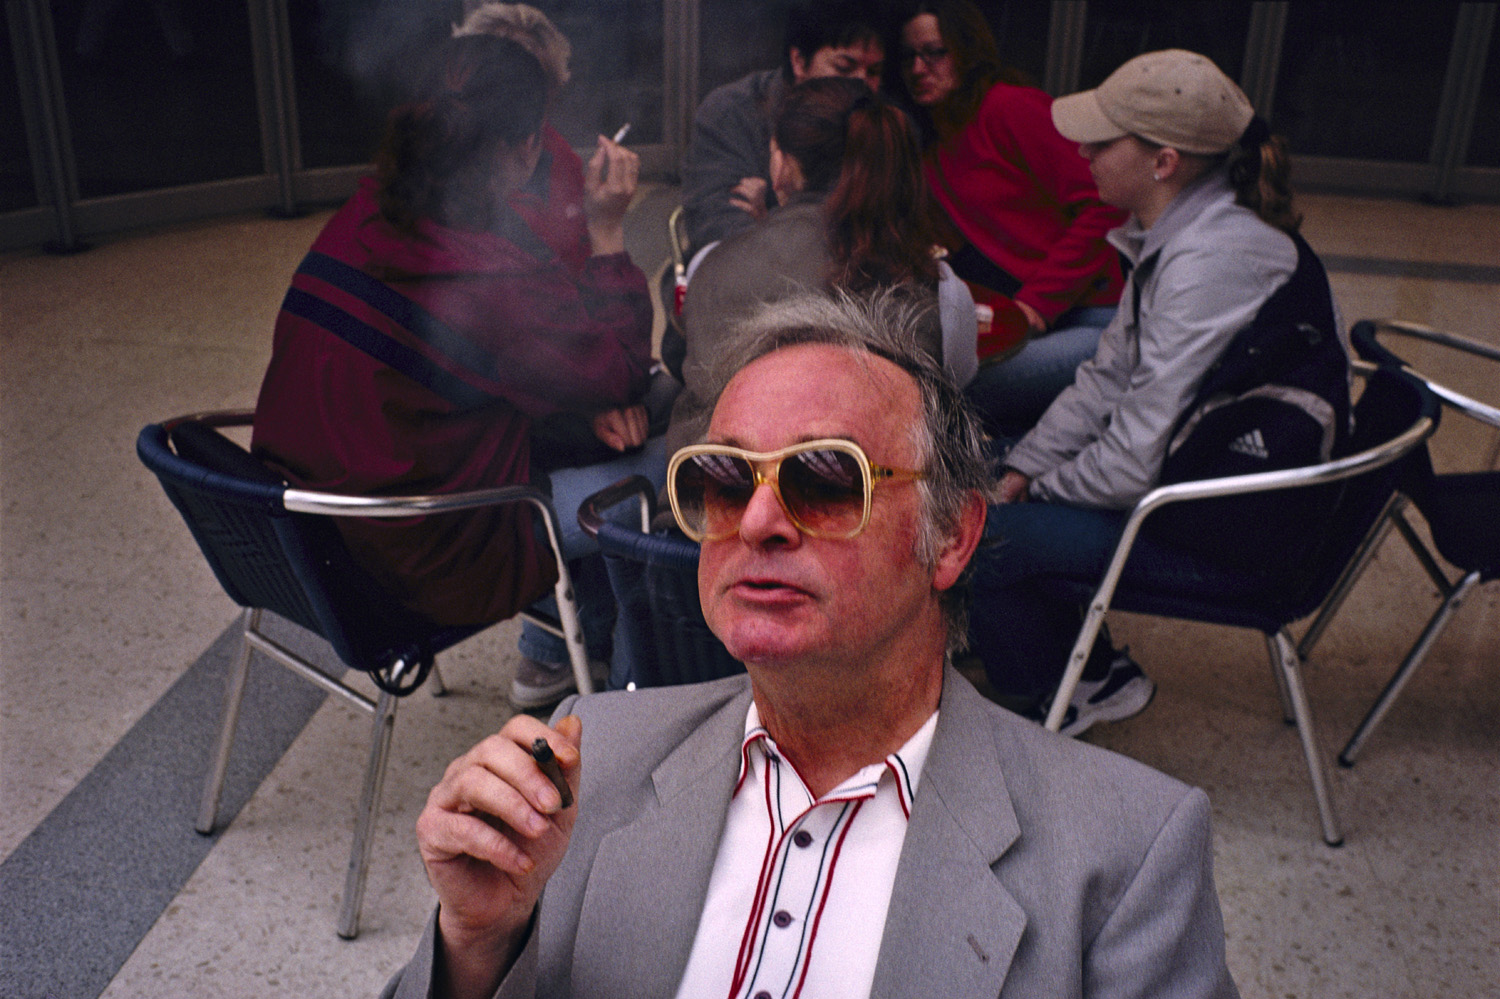 A grey-haired man in sunglasses and a suit smokes a cigarette, with a group of young people smoking and chatting in the background.